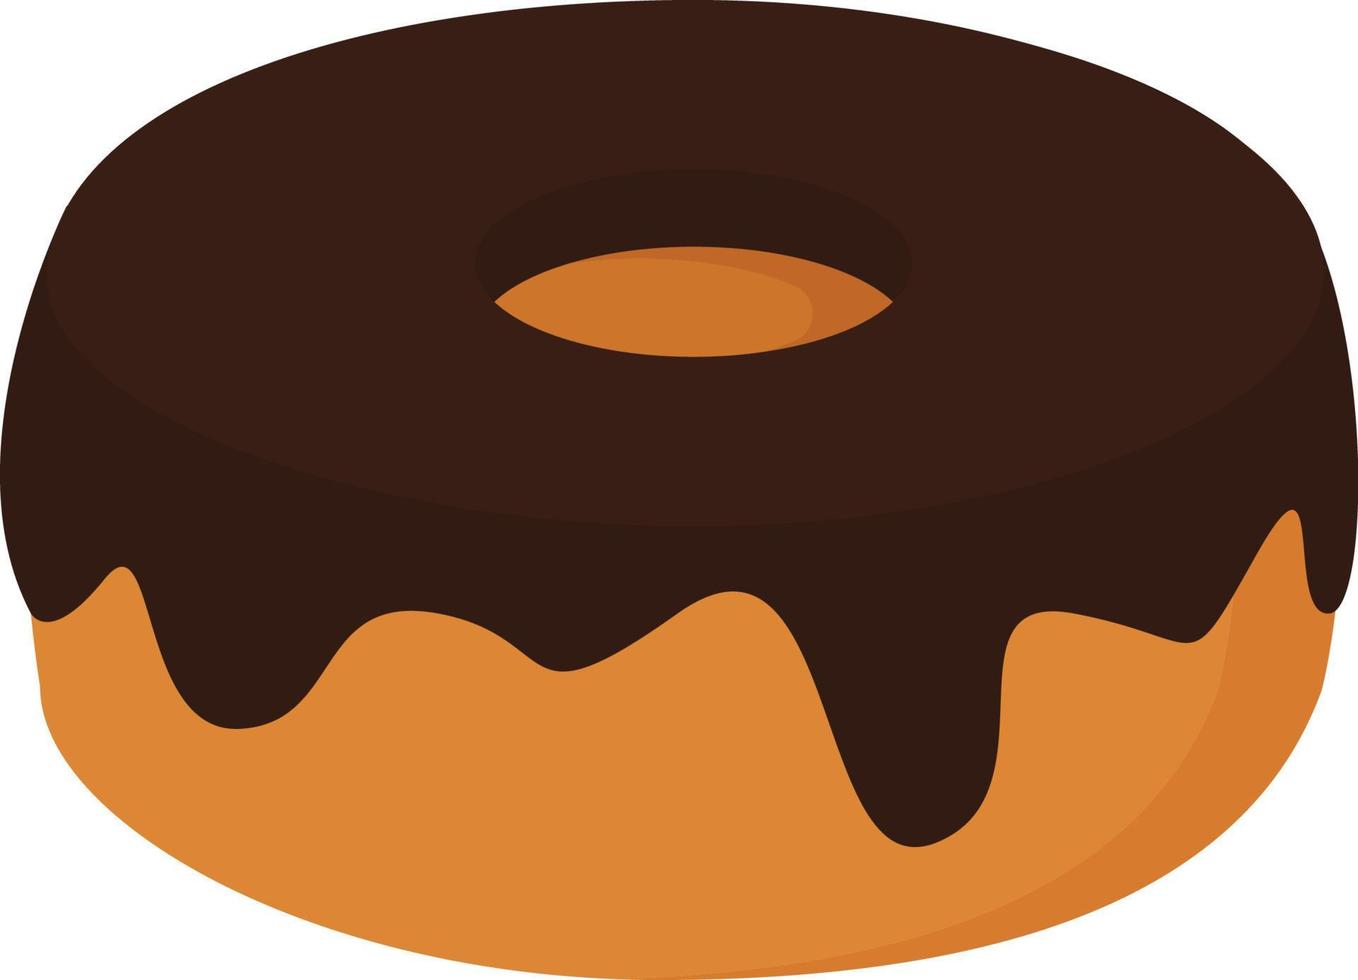 Donut with chocolate, illustration, vector on white background.